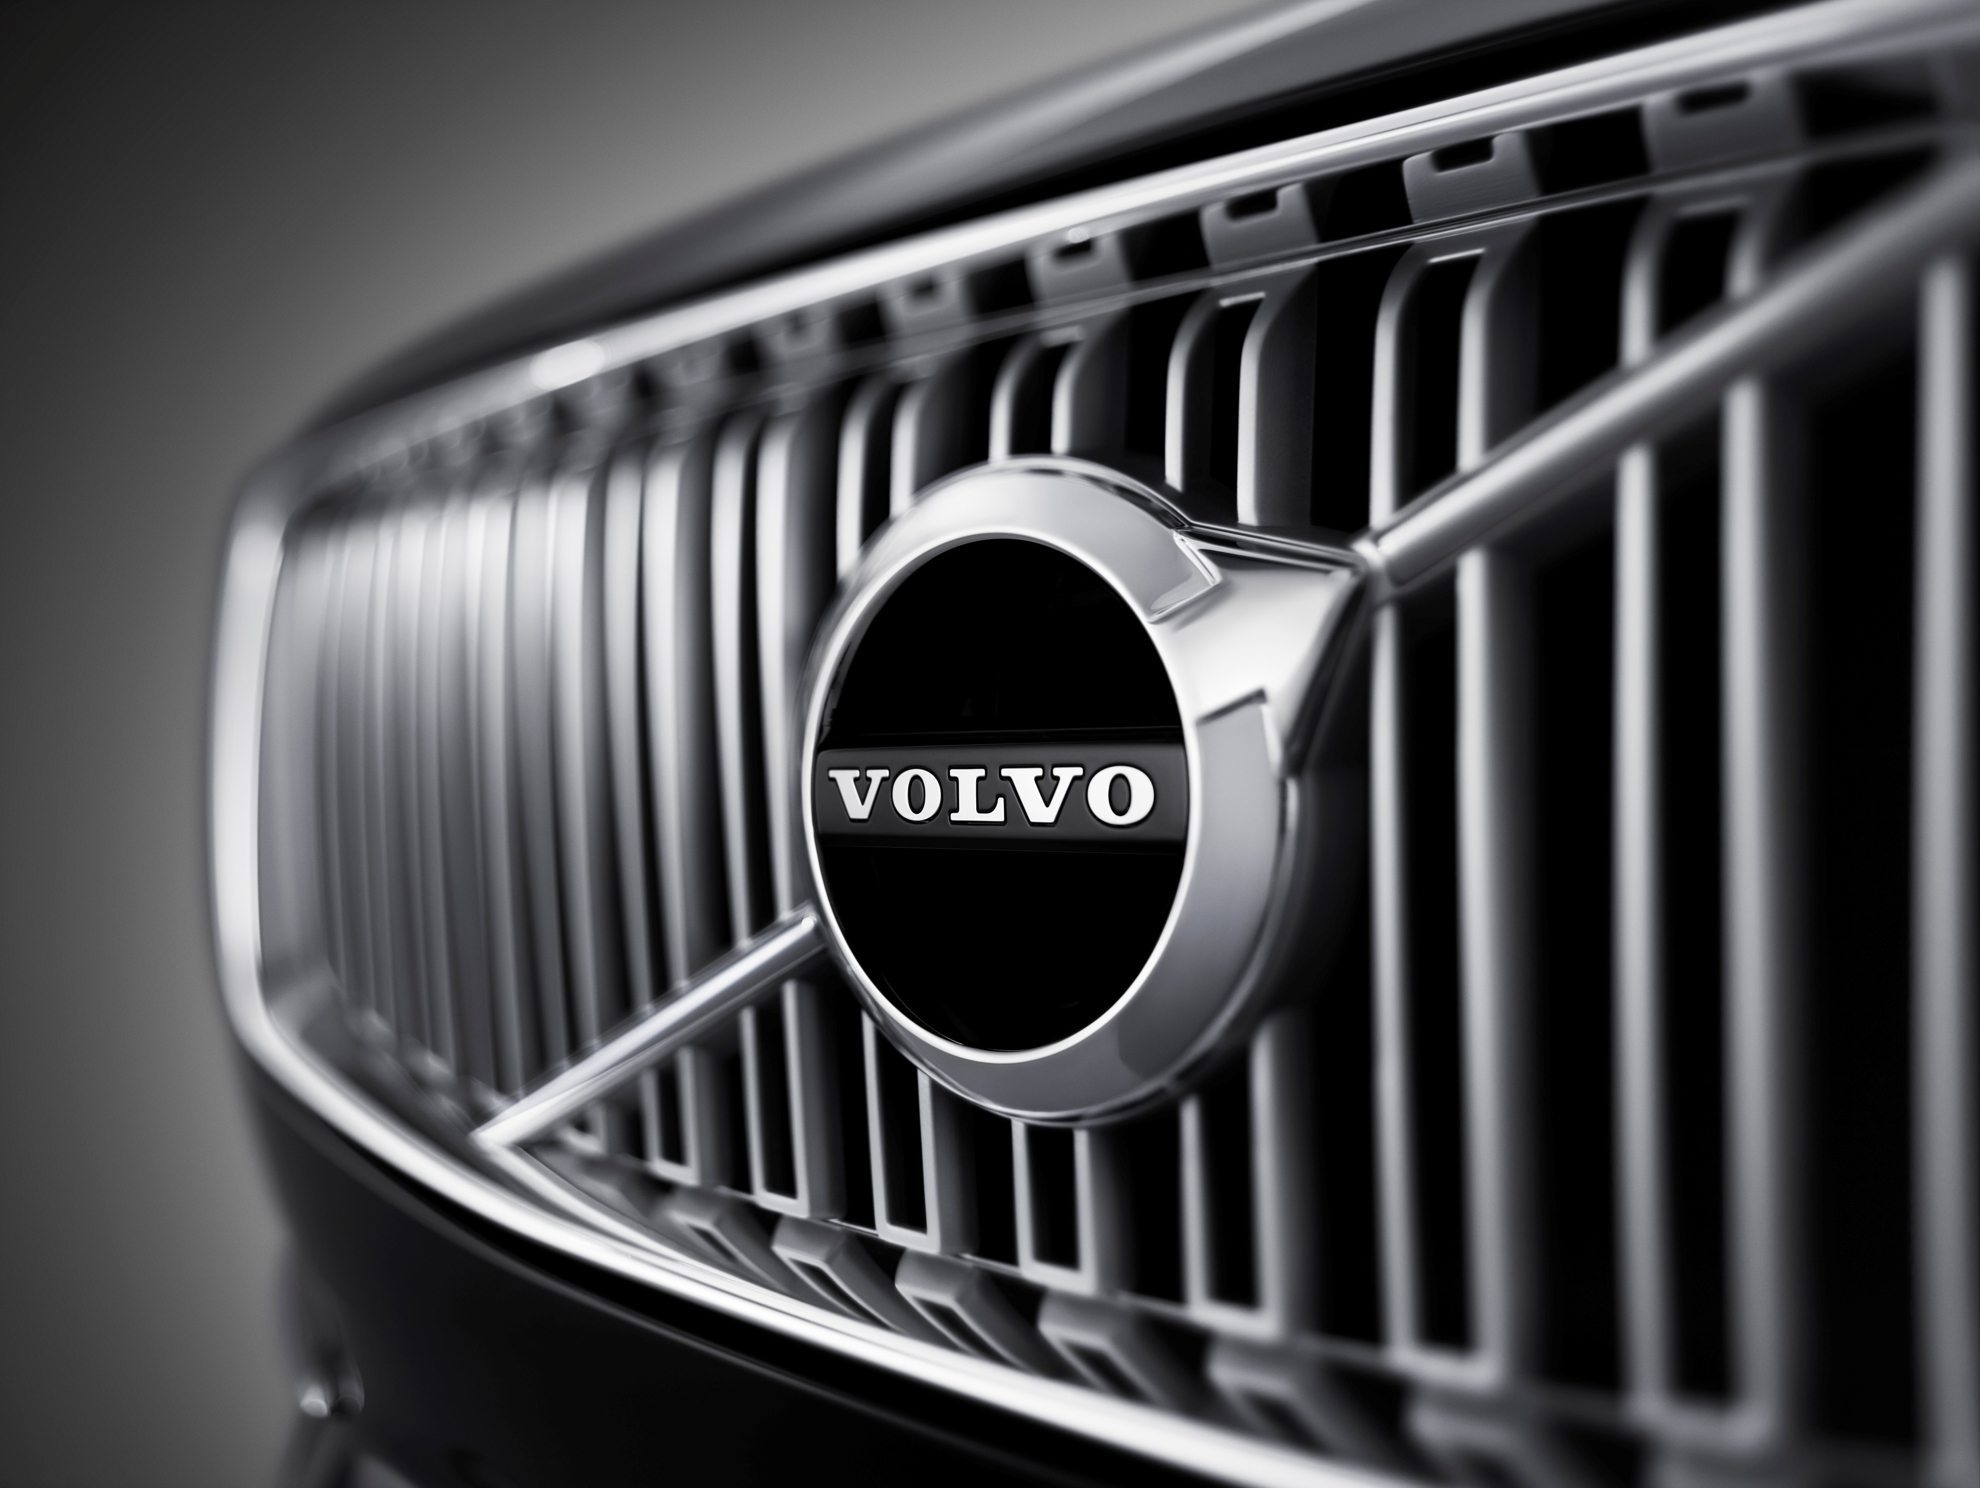 New VOLVO XC90 For Sale Online